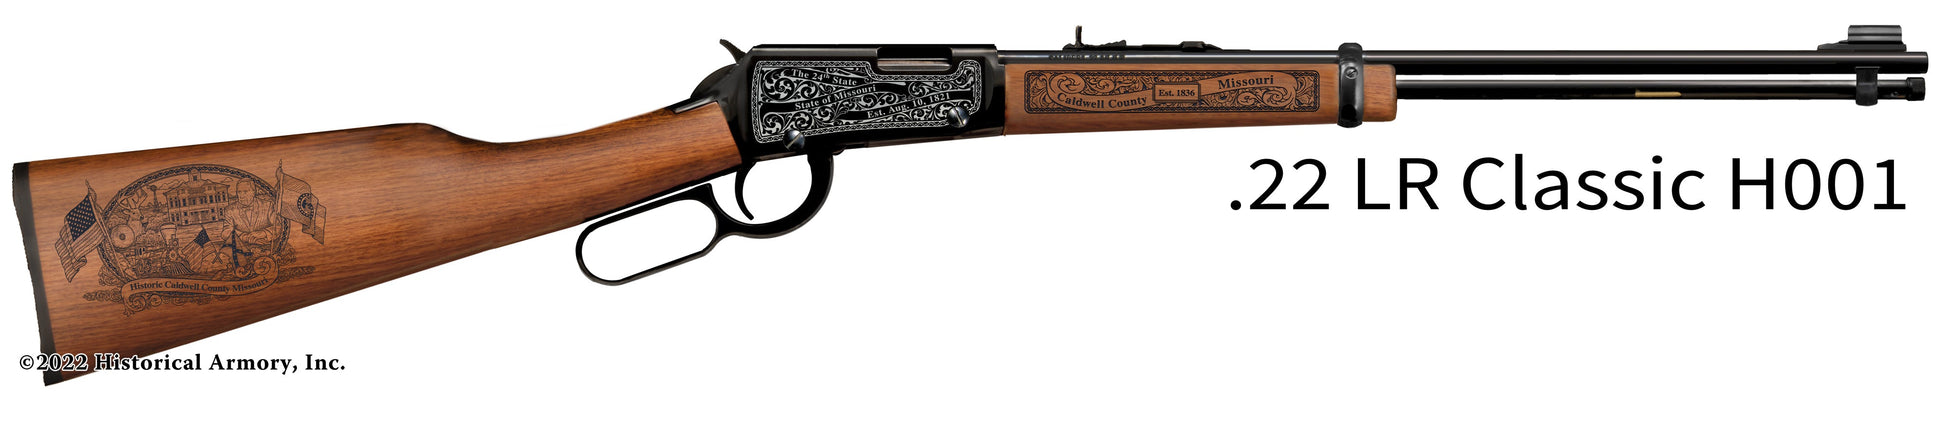 Caldwell County Missouri Engraved Henry H001 Rifle